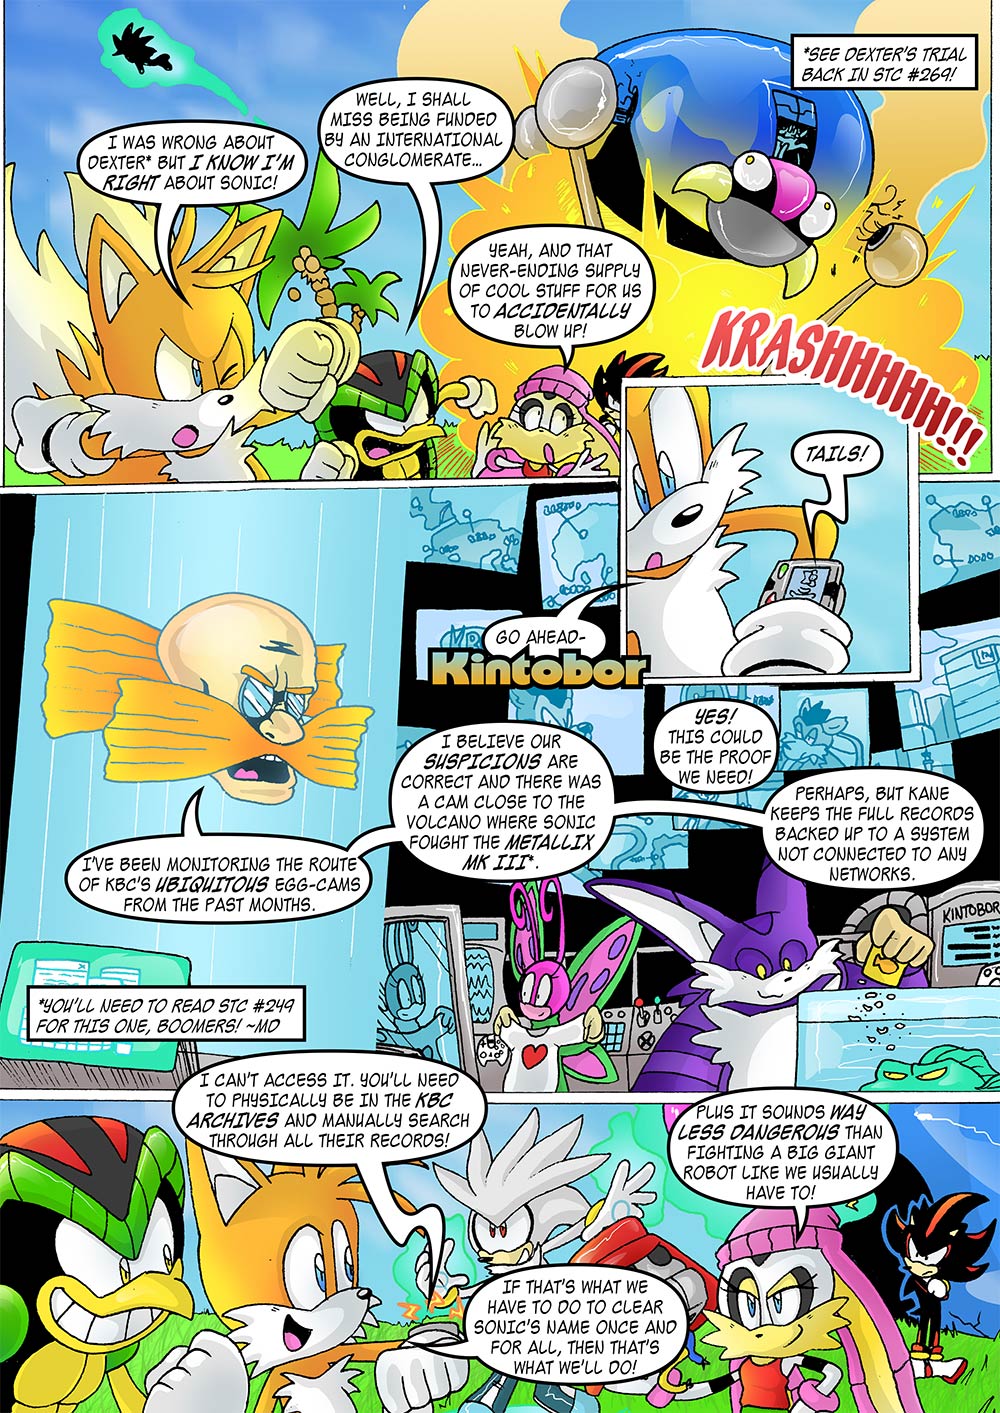 STC #275  Sonic the Comic Online!